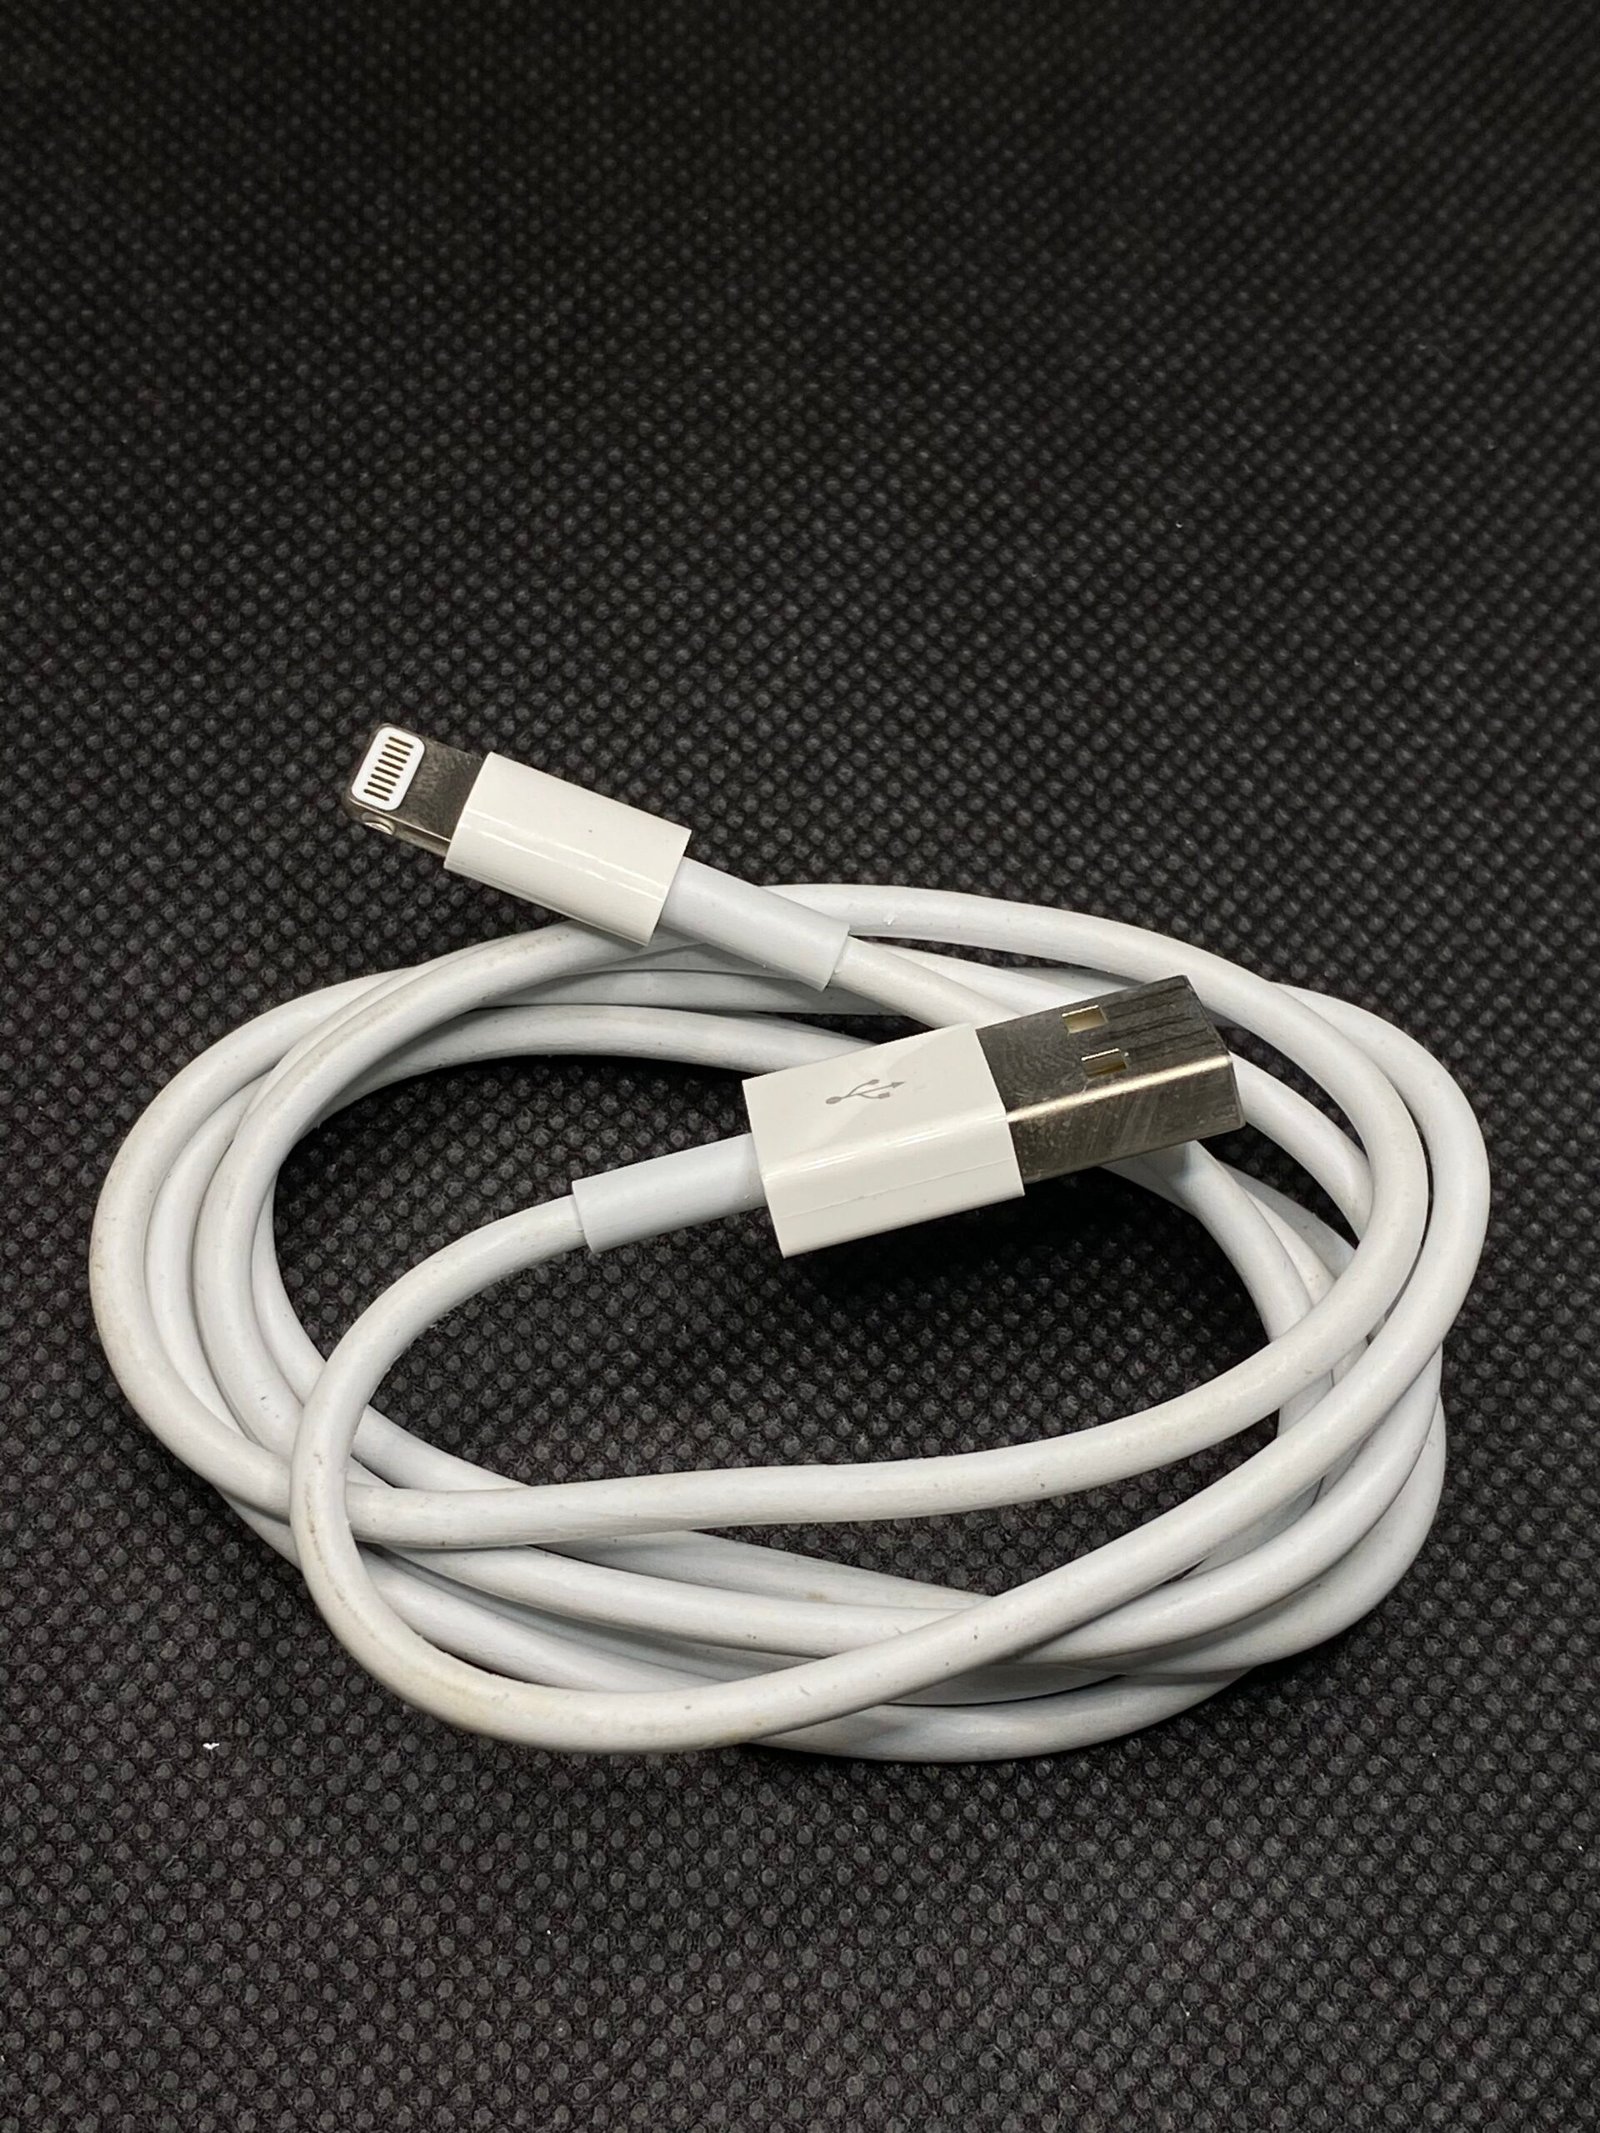 USB cable - Apple Products